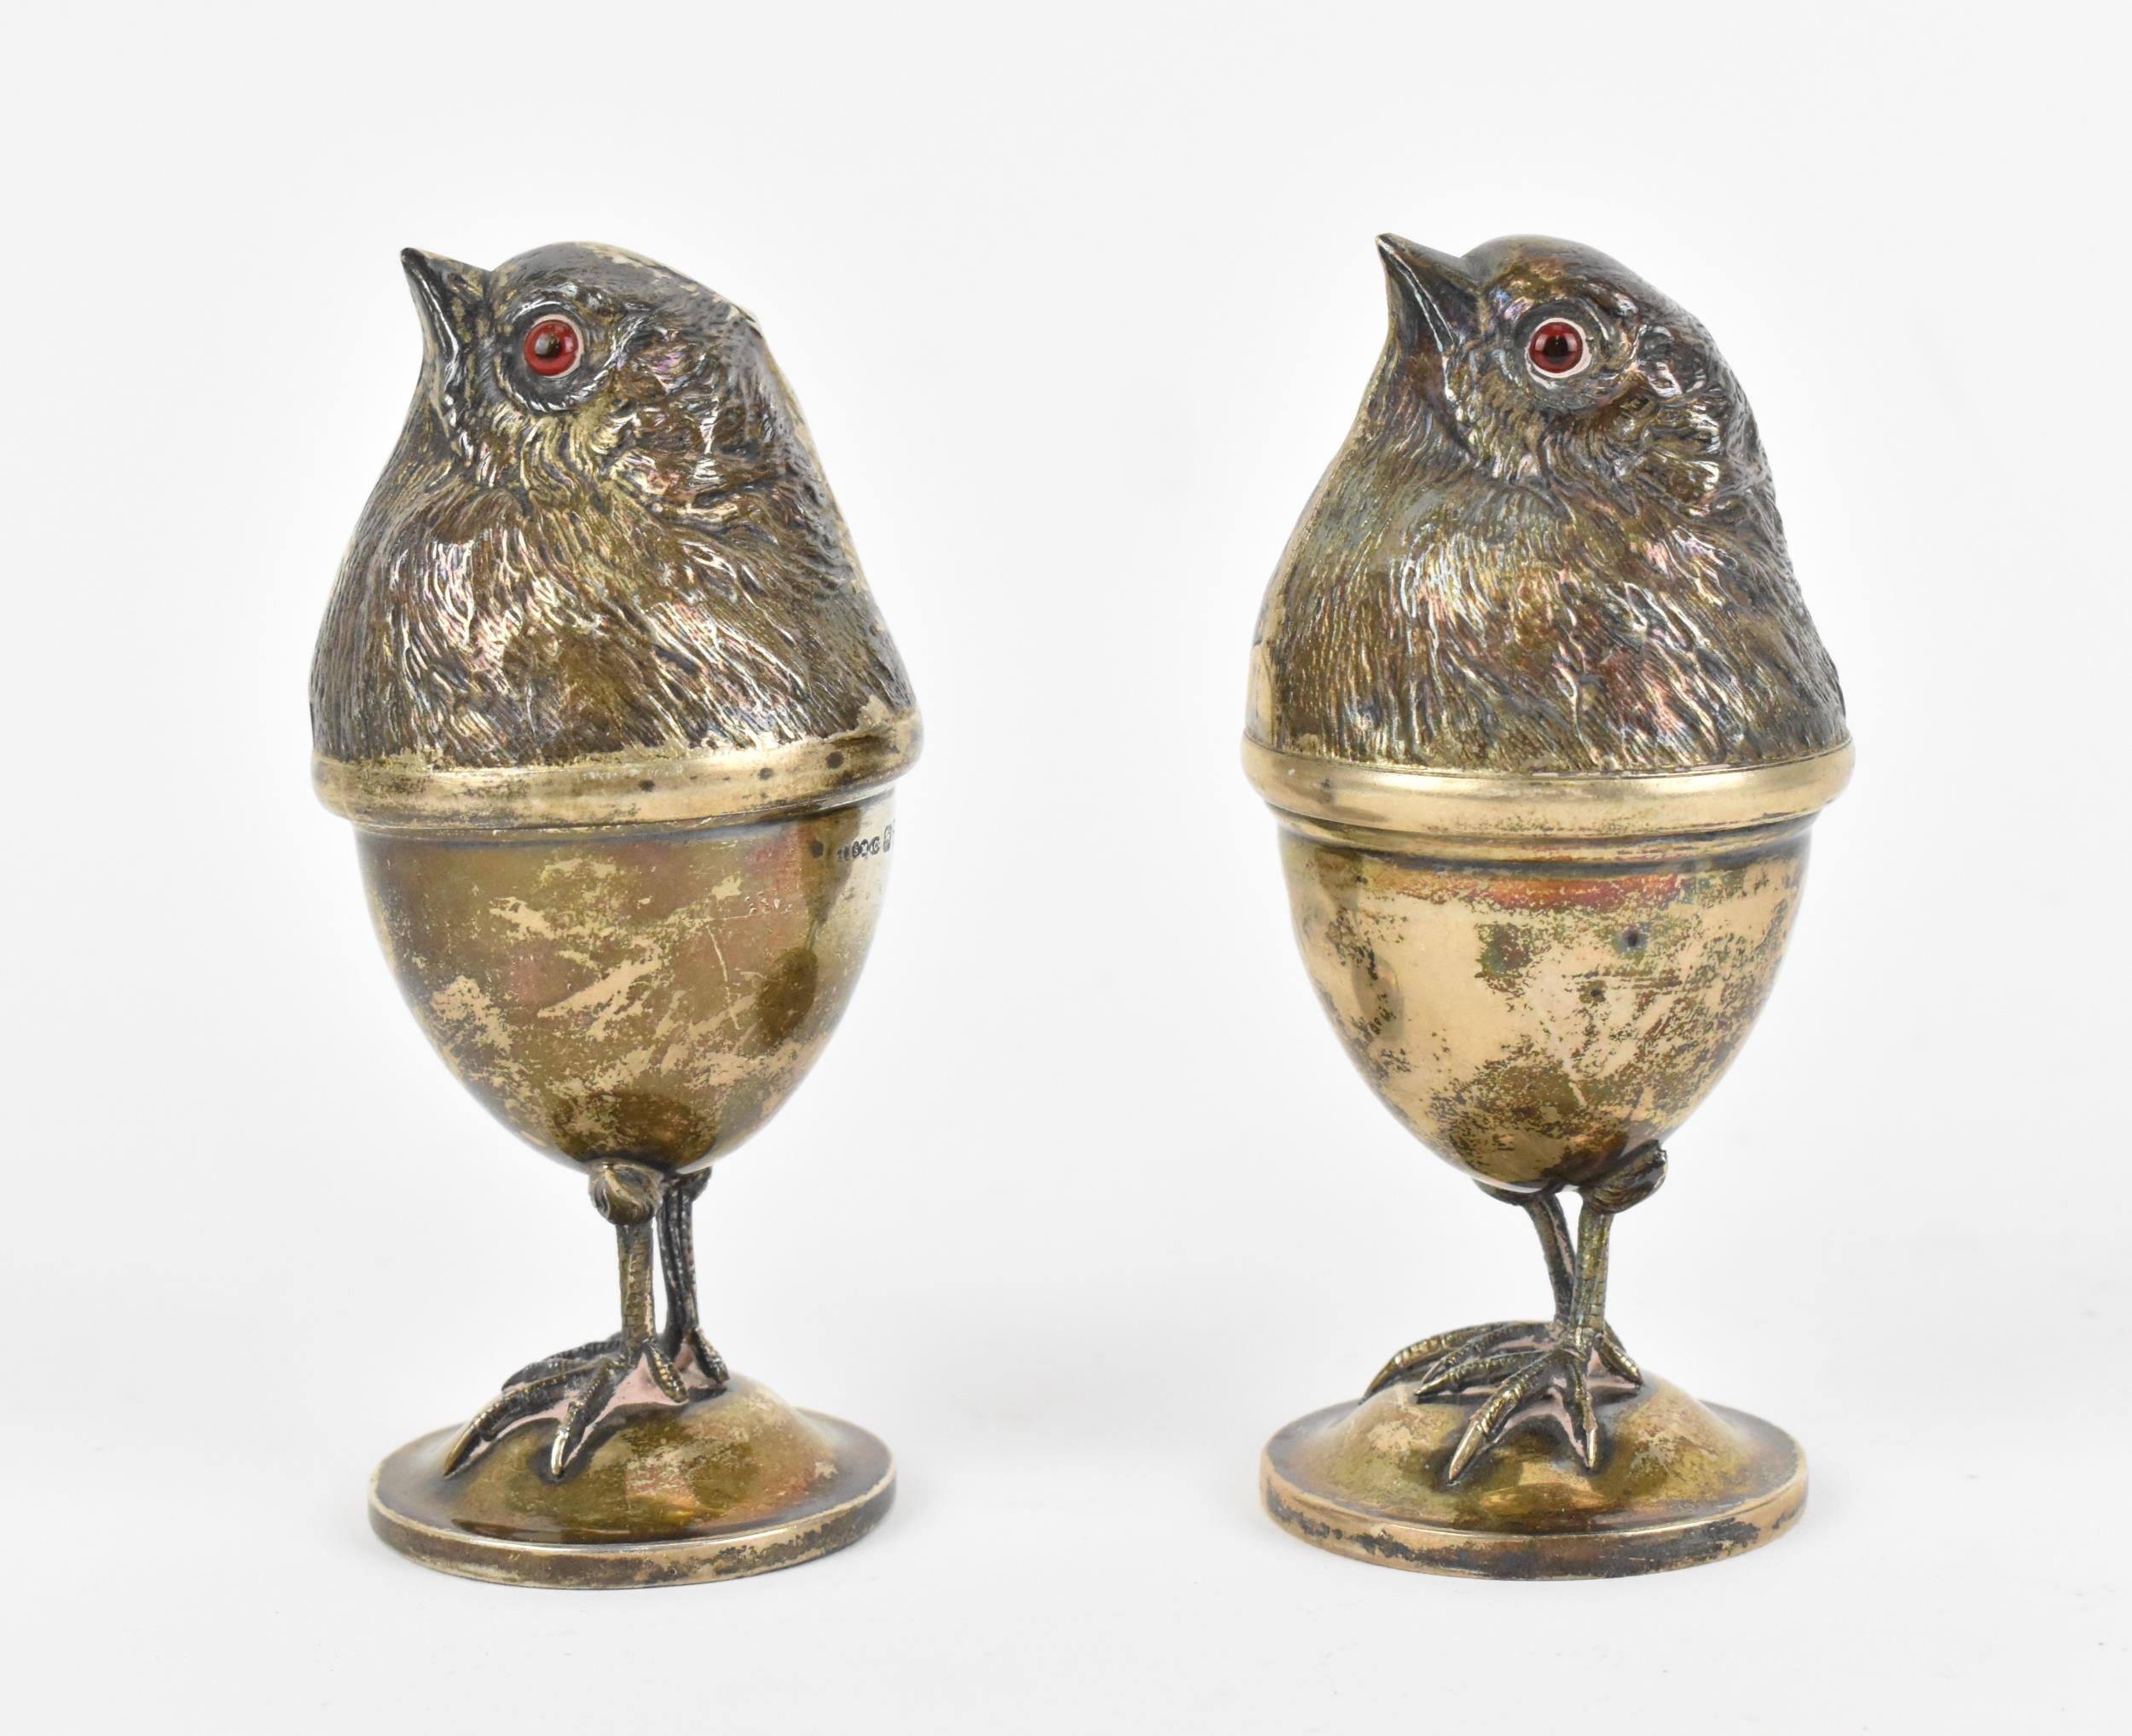 Two Edwardian silver novelty egg cups by Sampson Mordan & Co Ltd, Chester 1909, modelled as